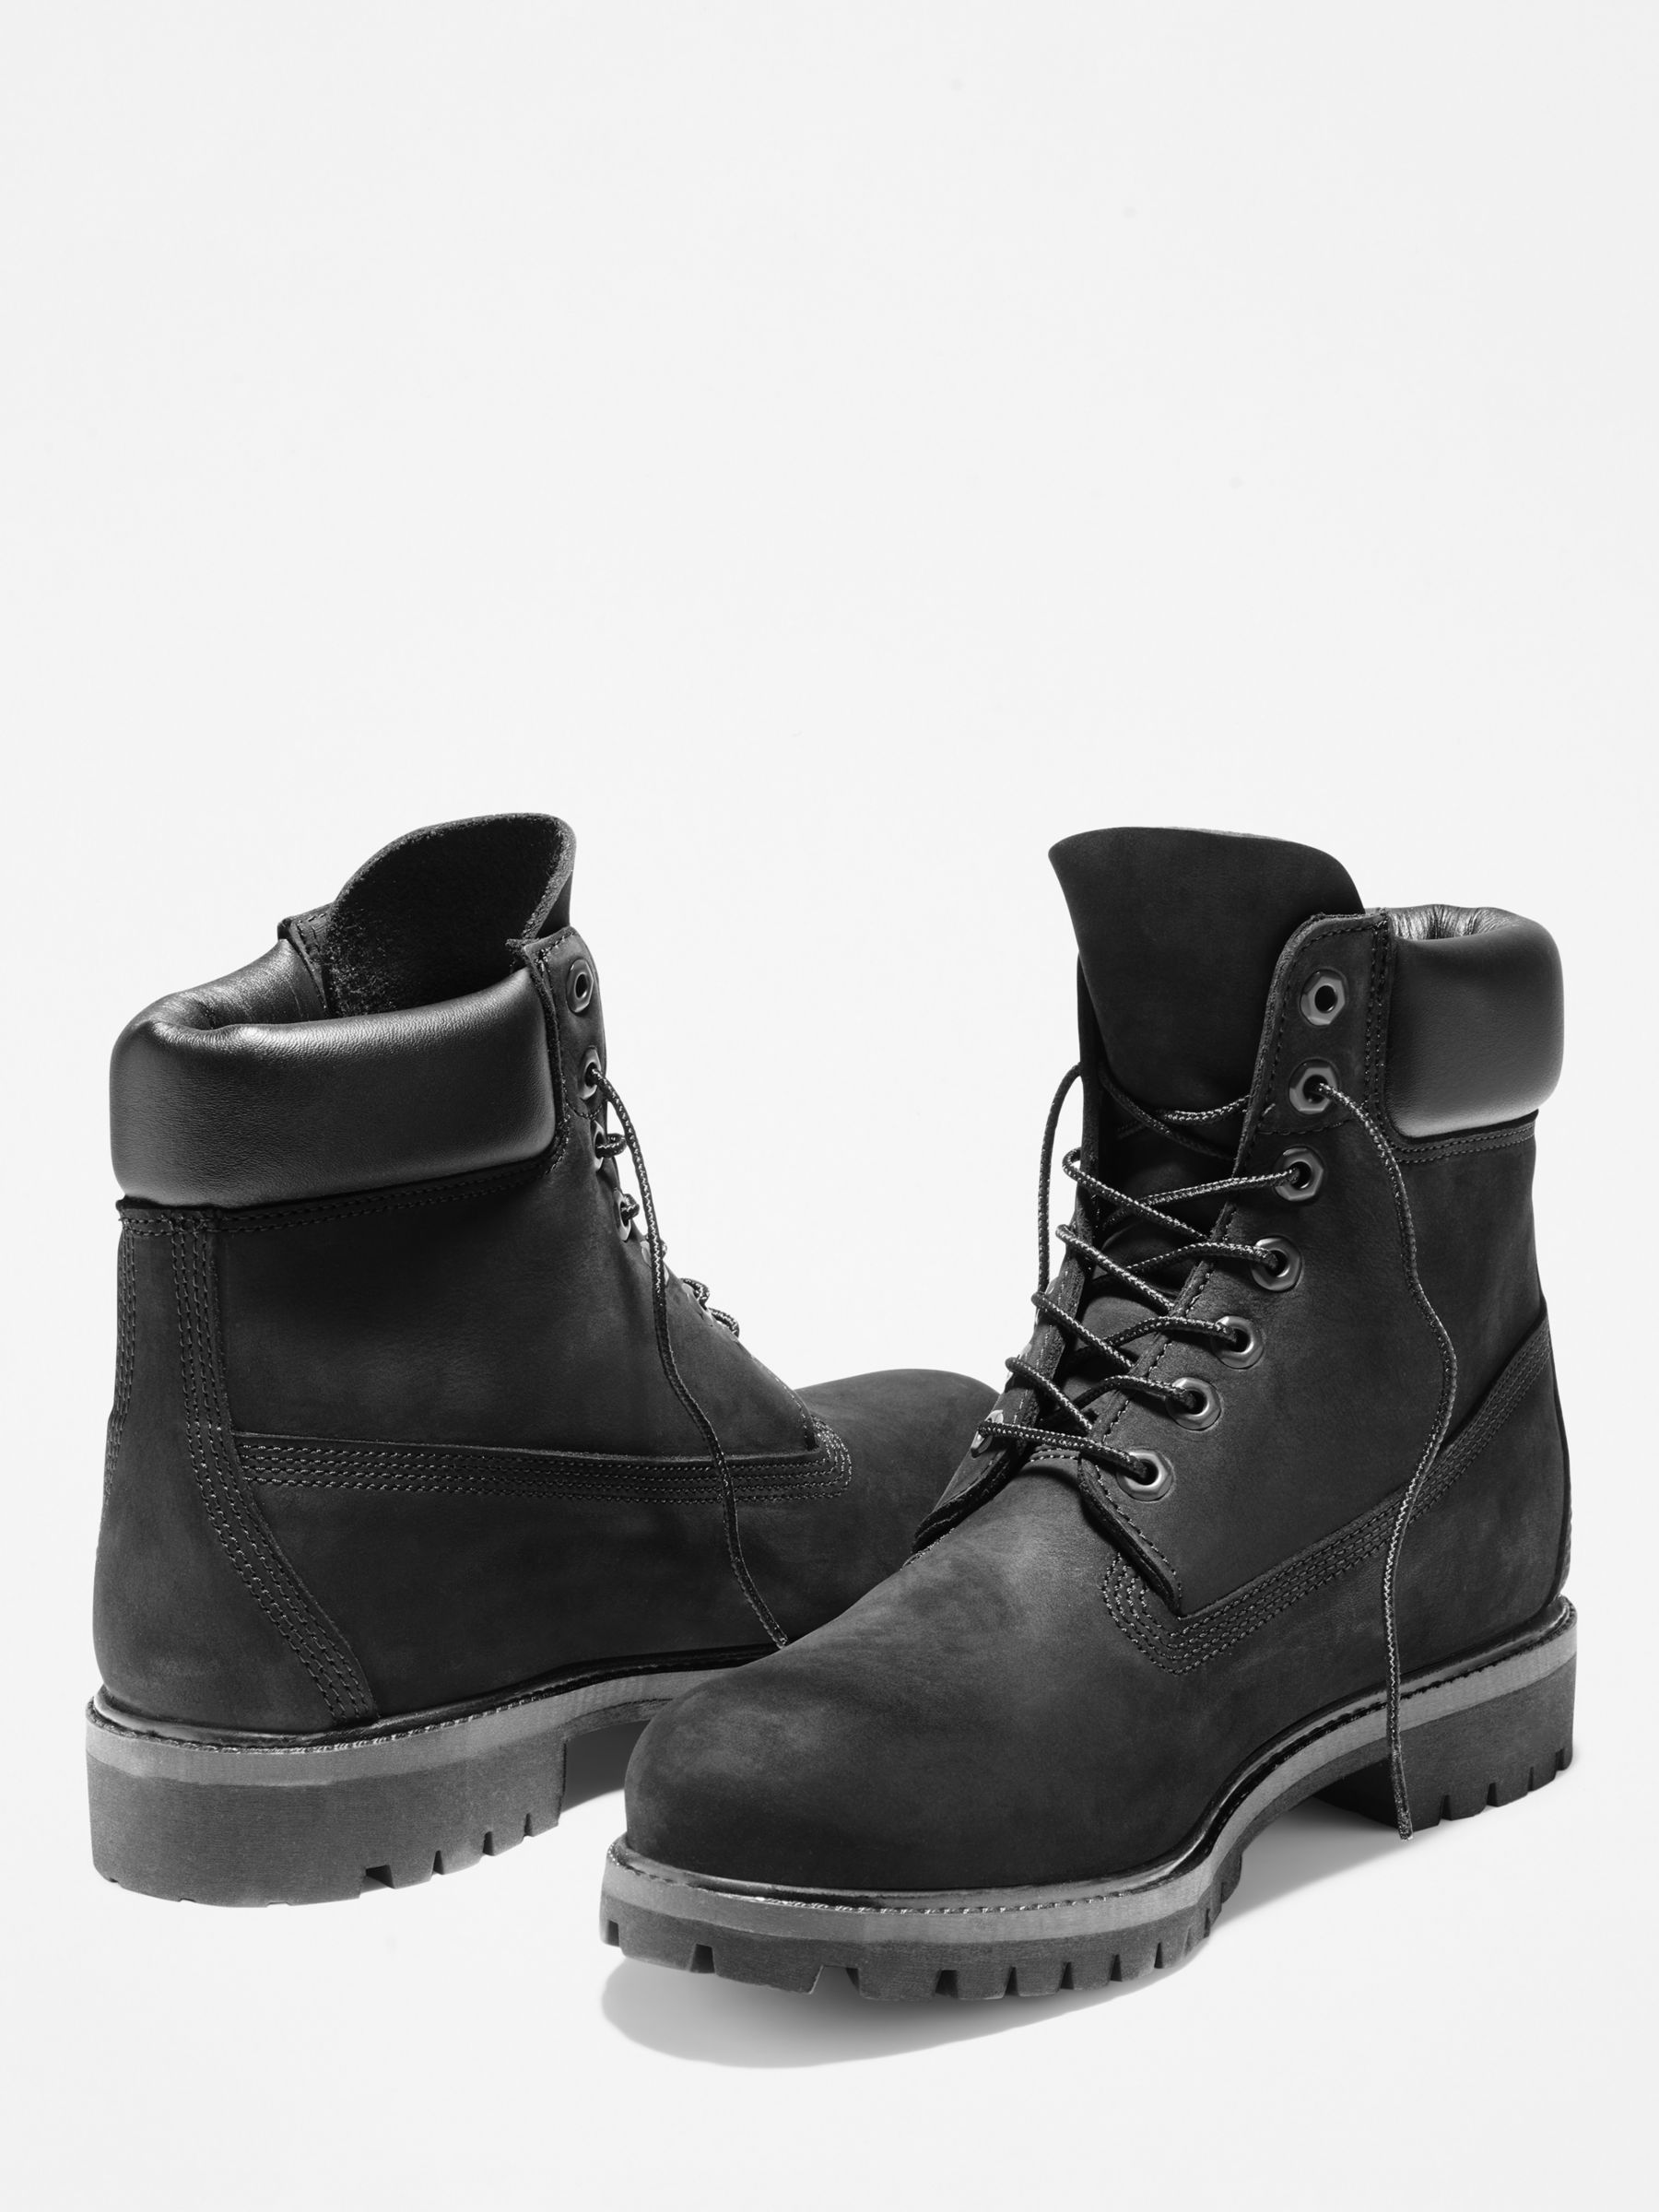 Timberland Fit Classic 6-Inch Premium Boots, Black at John Lewis &